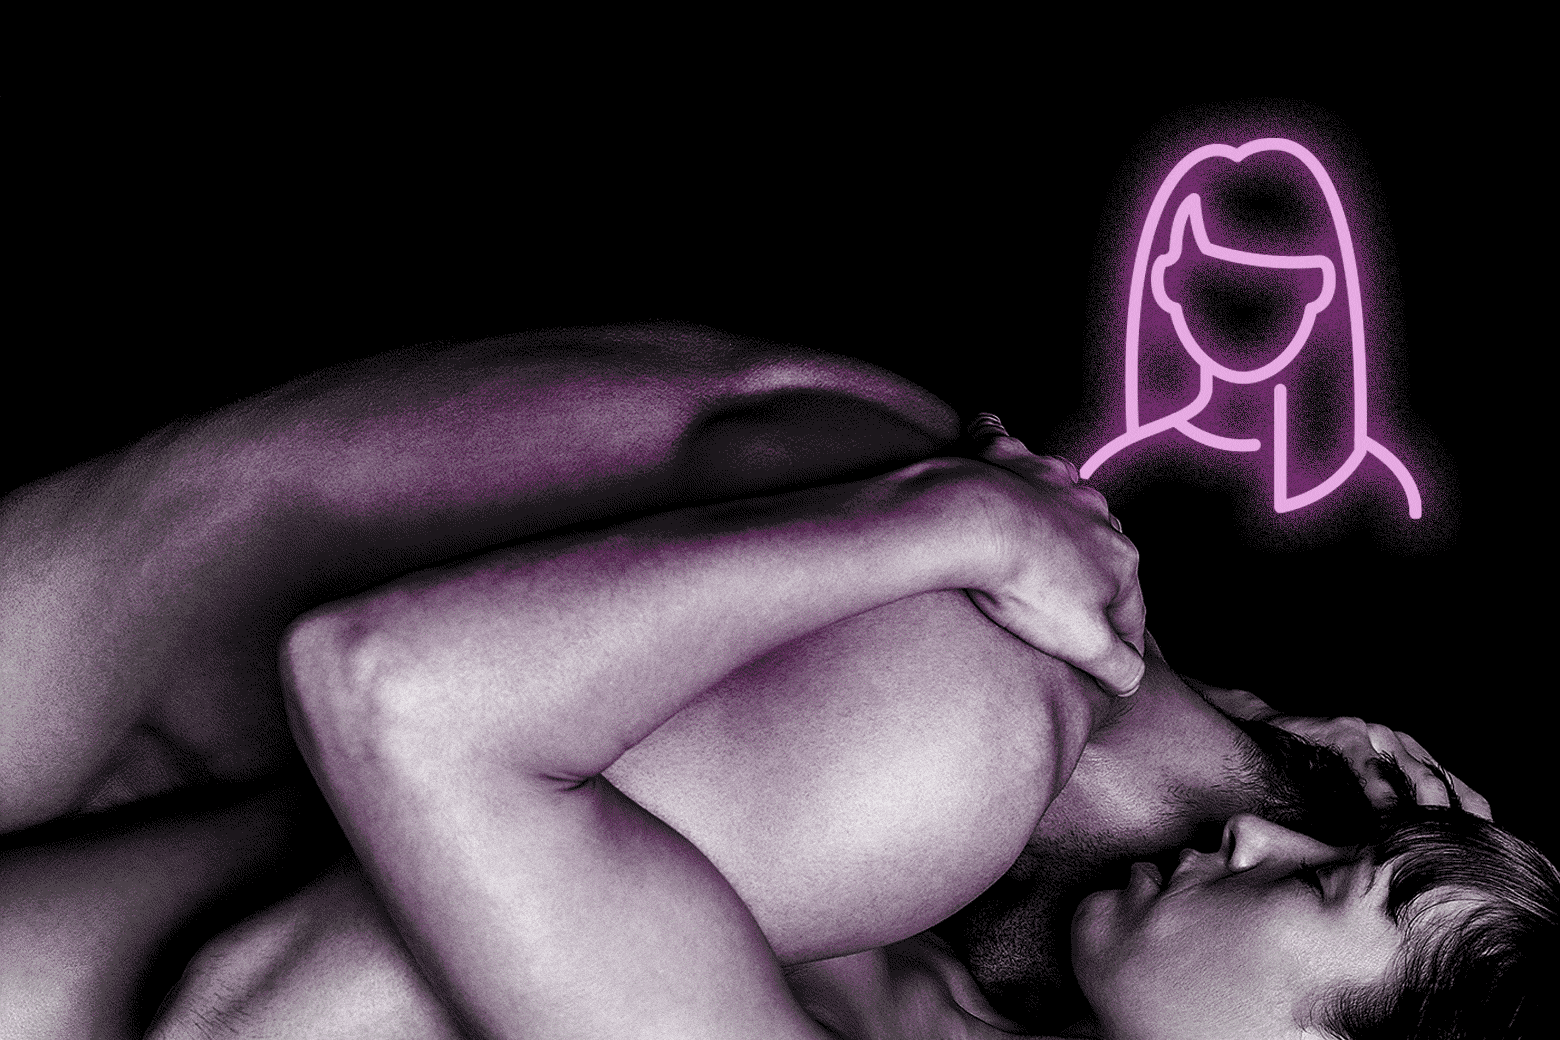 A man and woman in sexual embrace, while a female outline hangs over them.